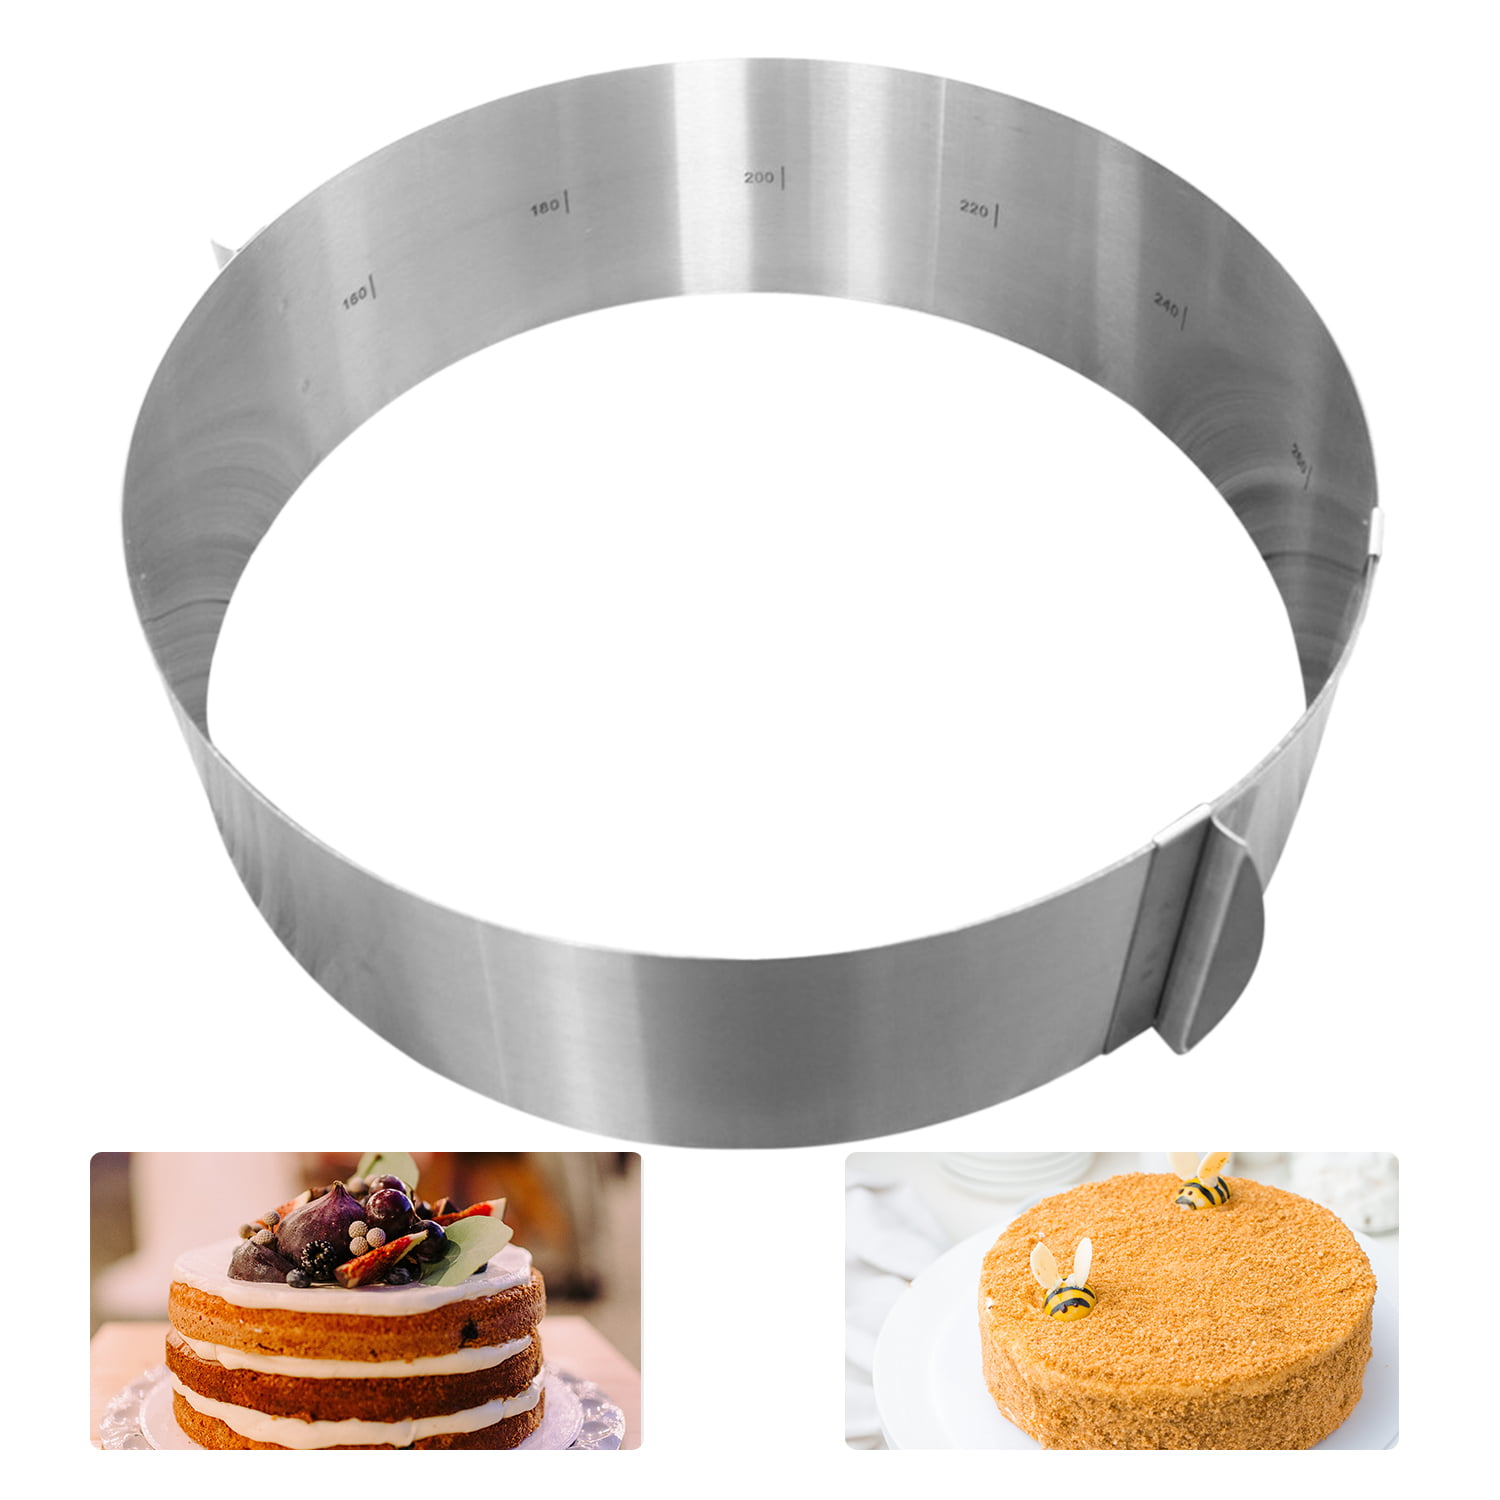 Silver Trintion Cake Ring Mold 6-12 Inch Stainless Steel Adjustable Pastry Baking Mould Baking Tool Kit Set Mousse Mould